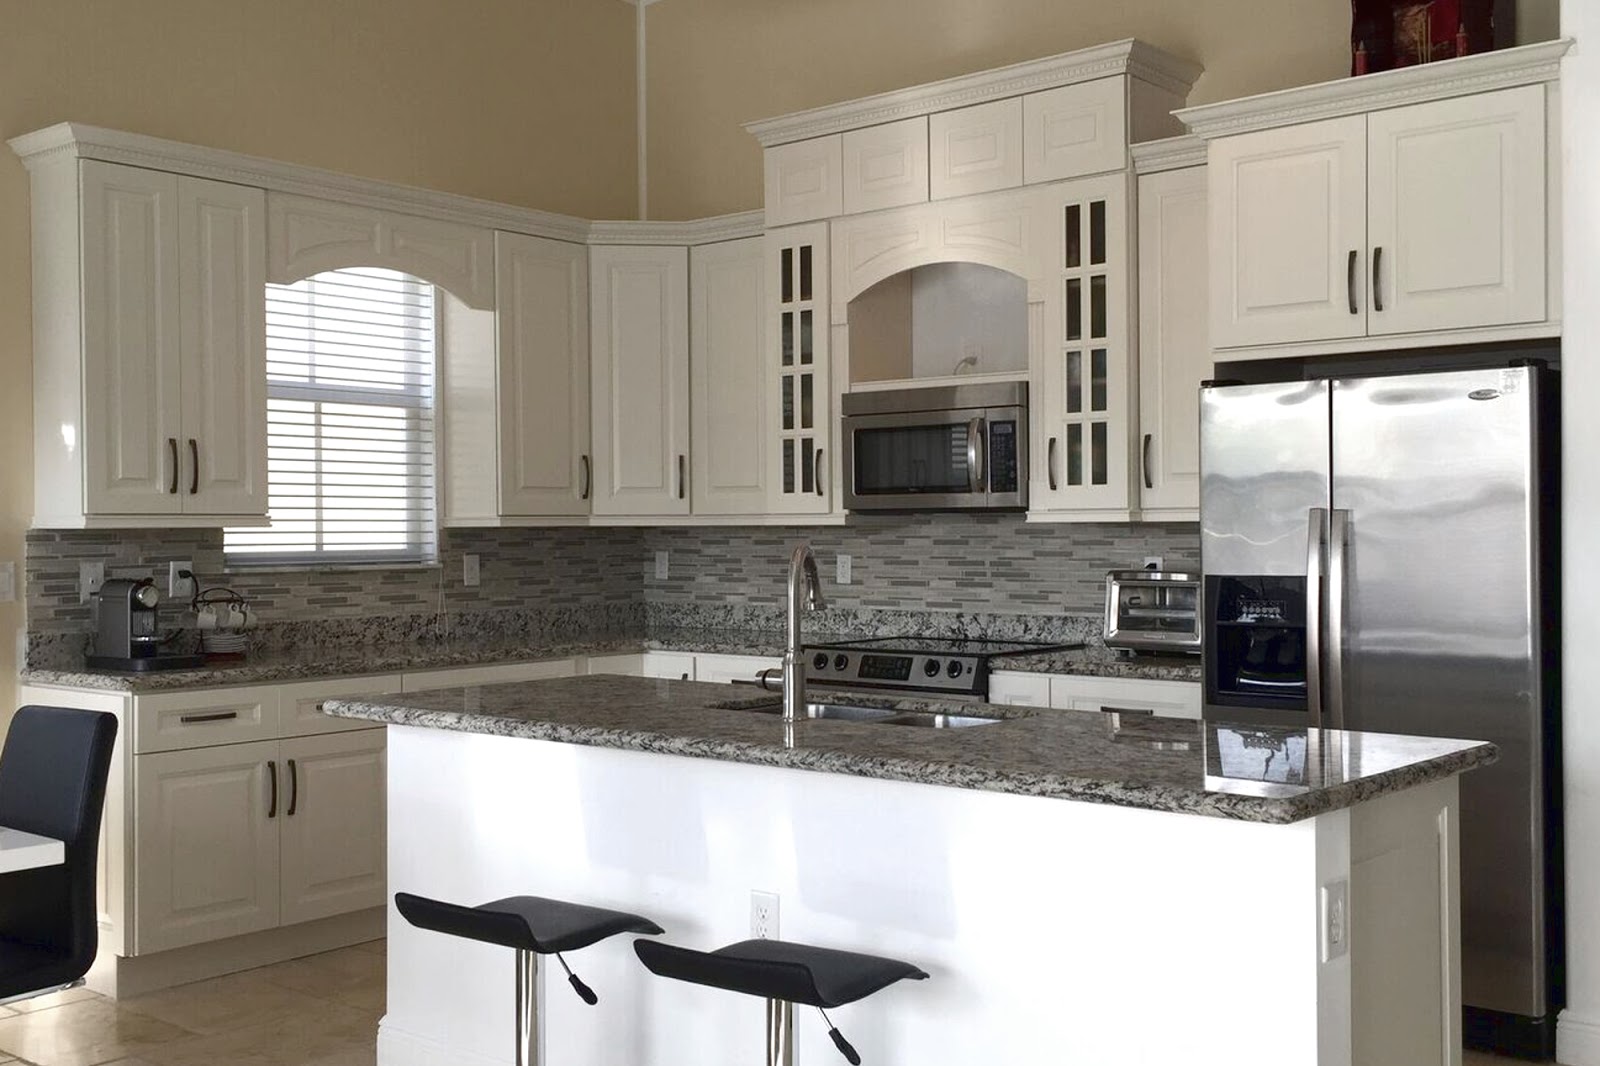 Jarlin Cabinetry - Beautiful Cabinets at Great Prices: A Great Line of ...